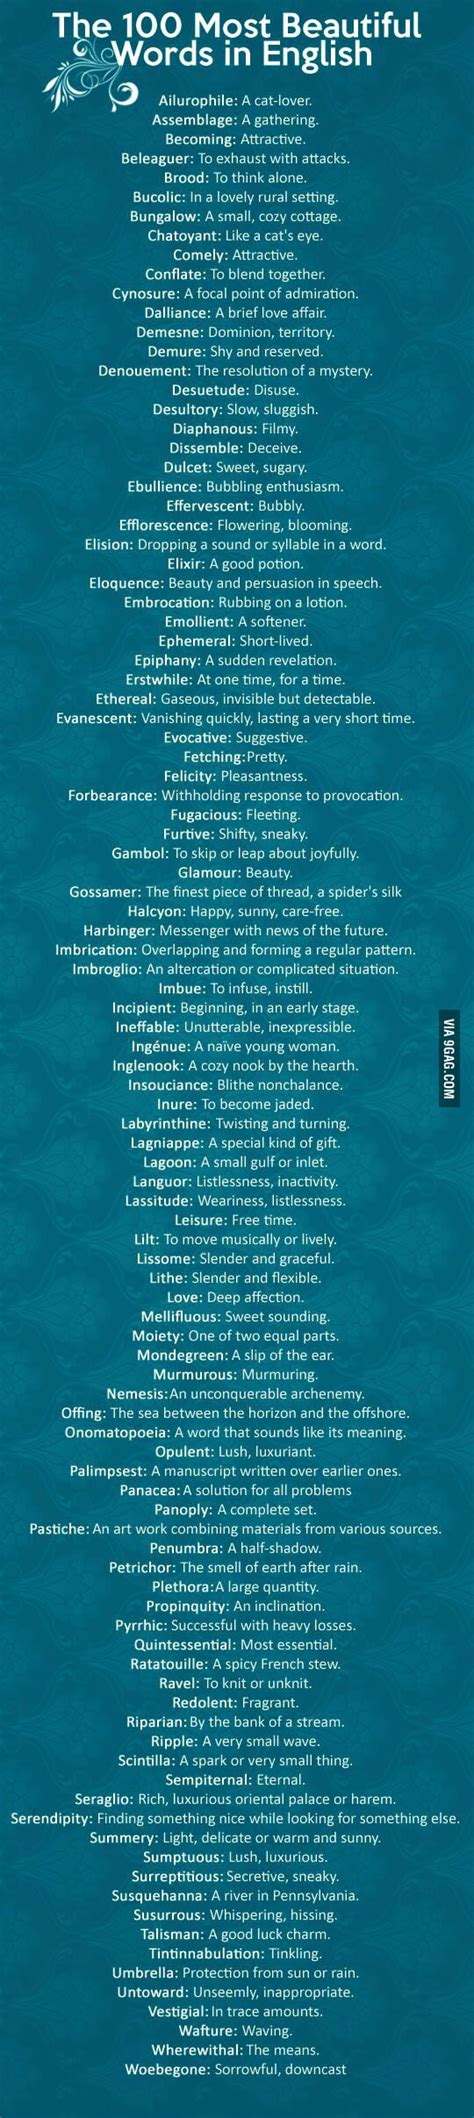 The 100 Most Beautiful Words In English 9gag